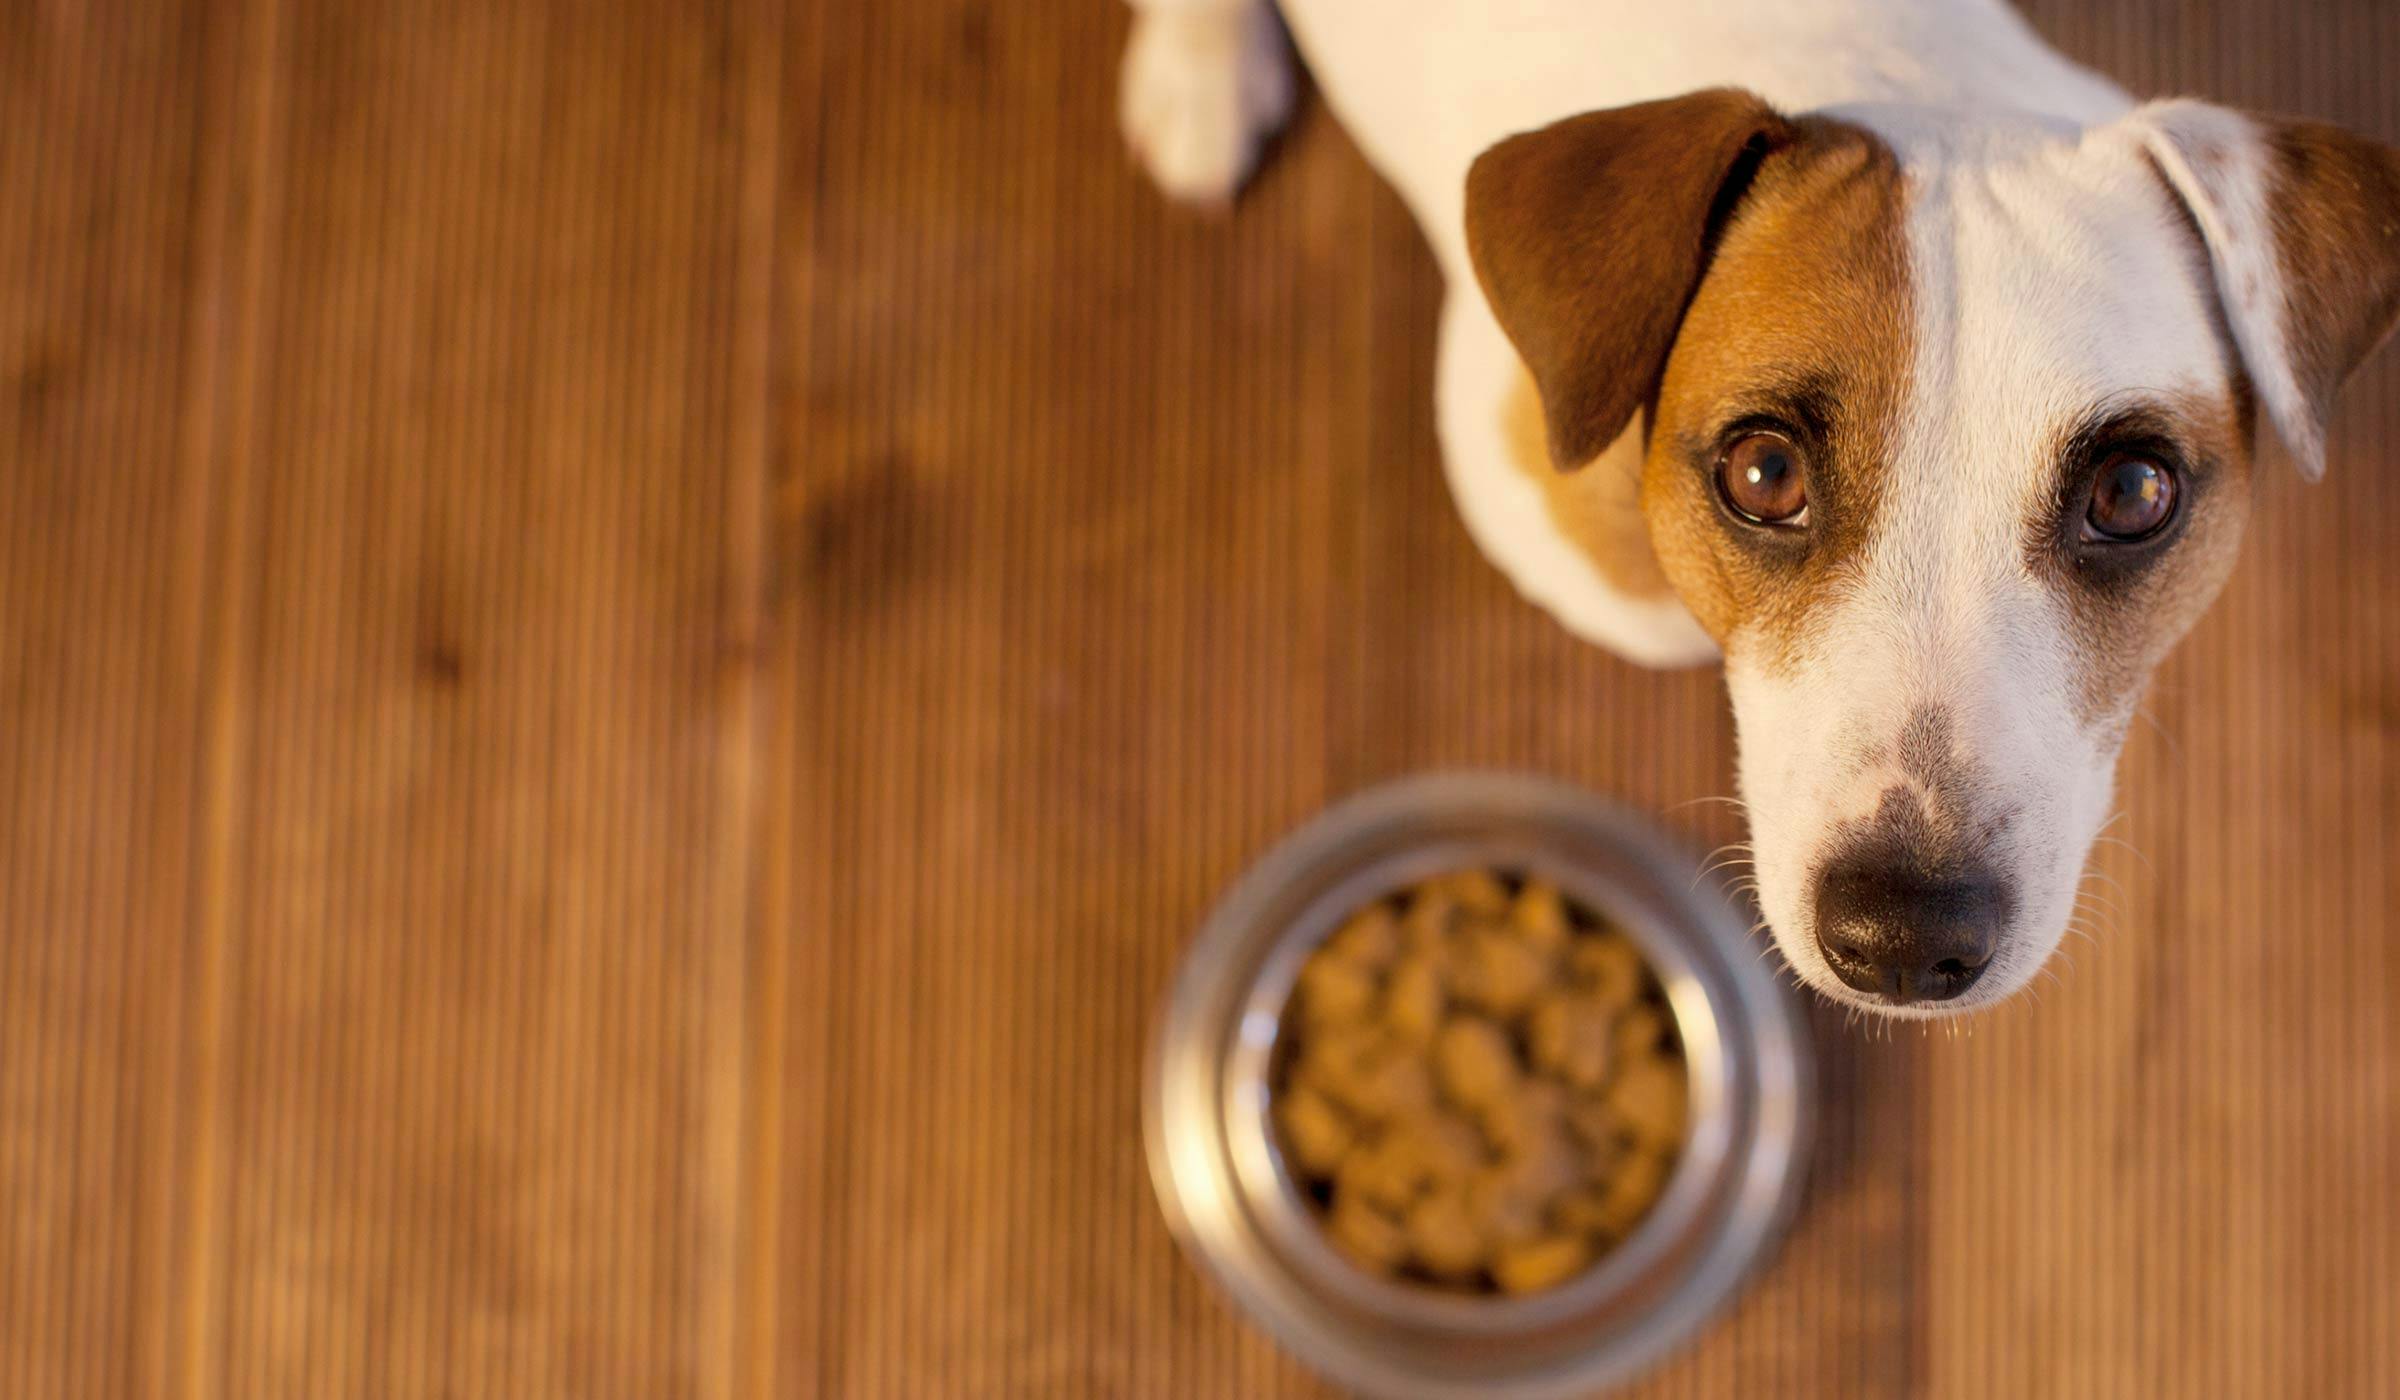 Will Work For Food: Turn Your Dog's Mealtime Into Game Time